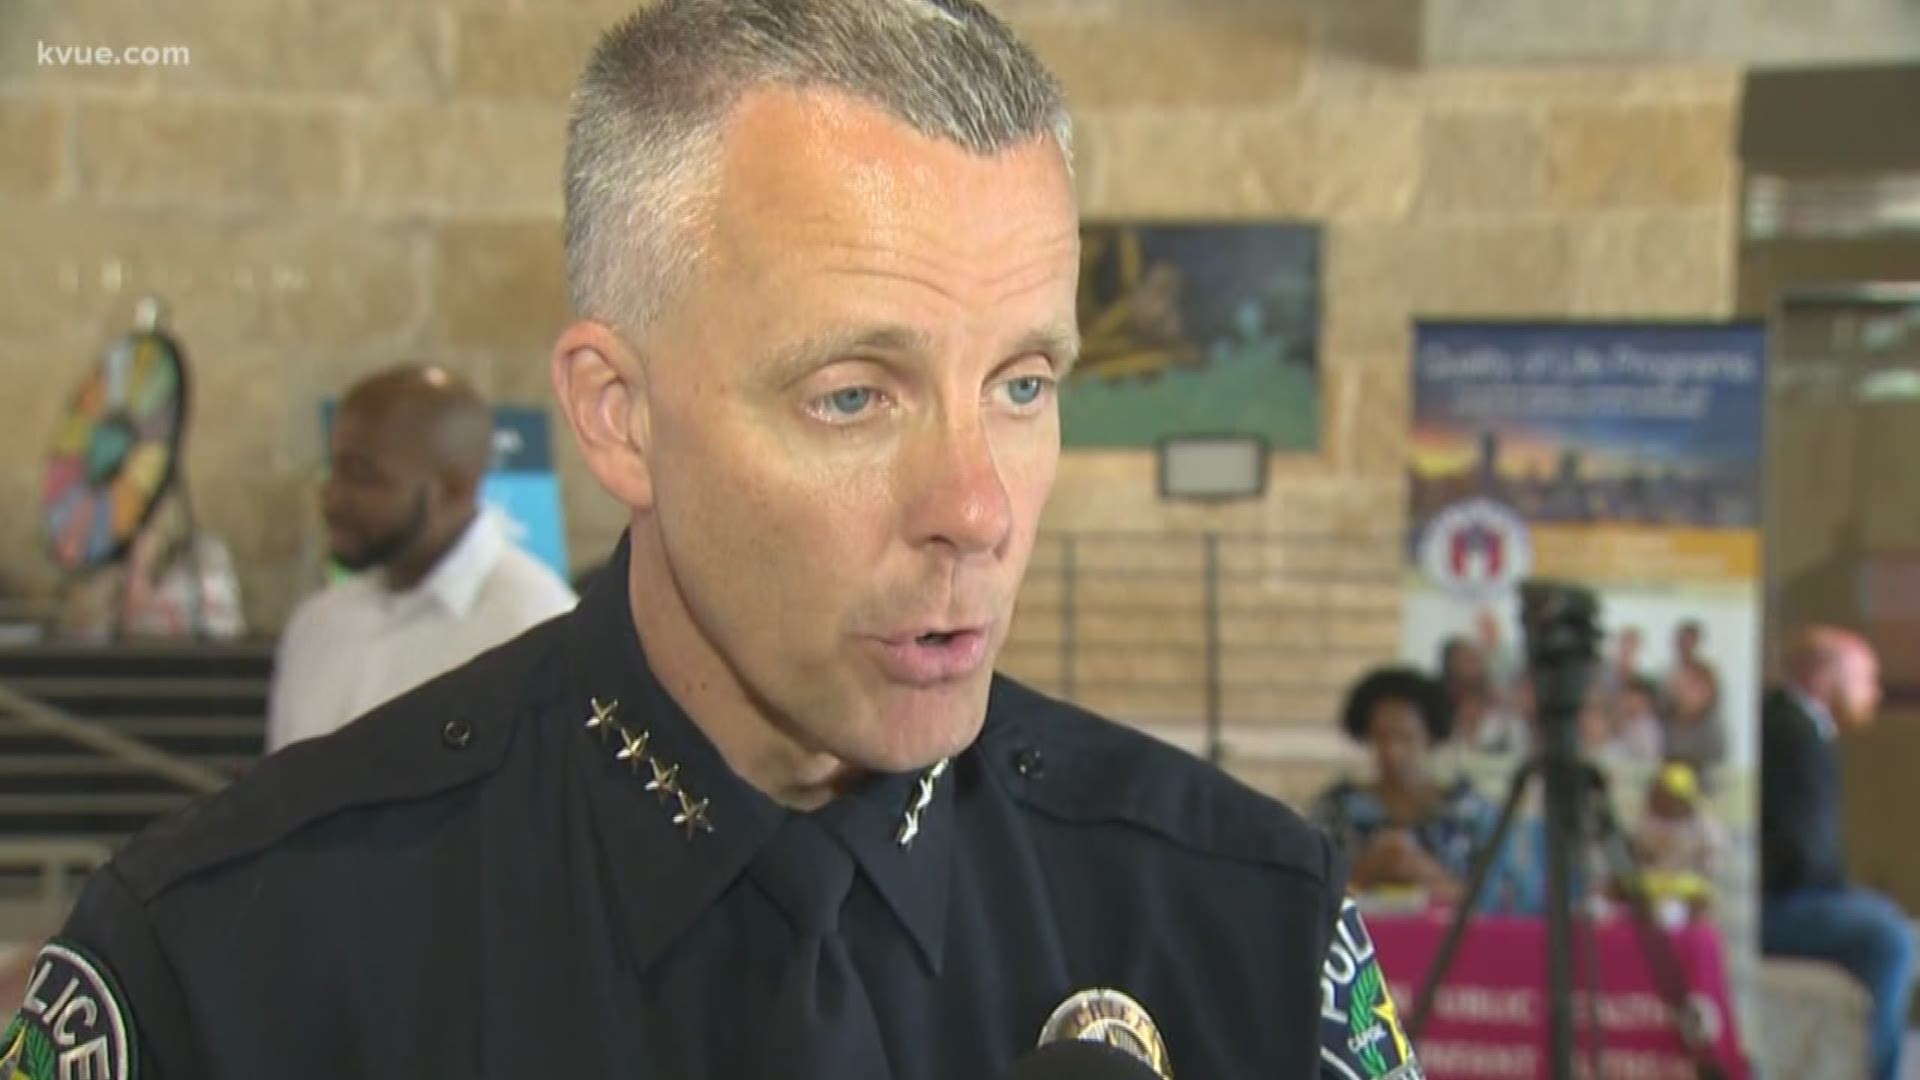 KVUE's Ashley Goudeau spoke with Interim Austin Police Chief Brian Manley to discuss criticism he has received for the language he used in Wednesday's press conference about the Austin bombing suspect.